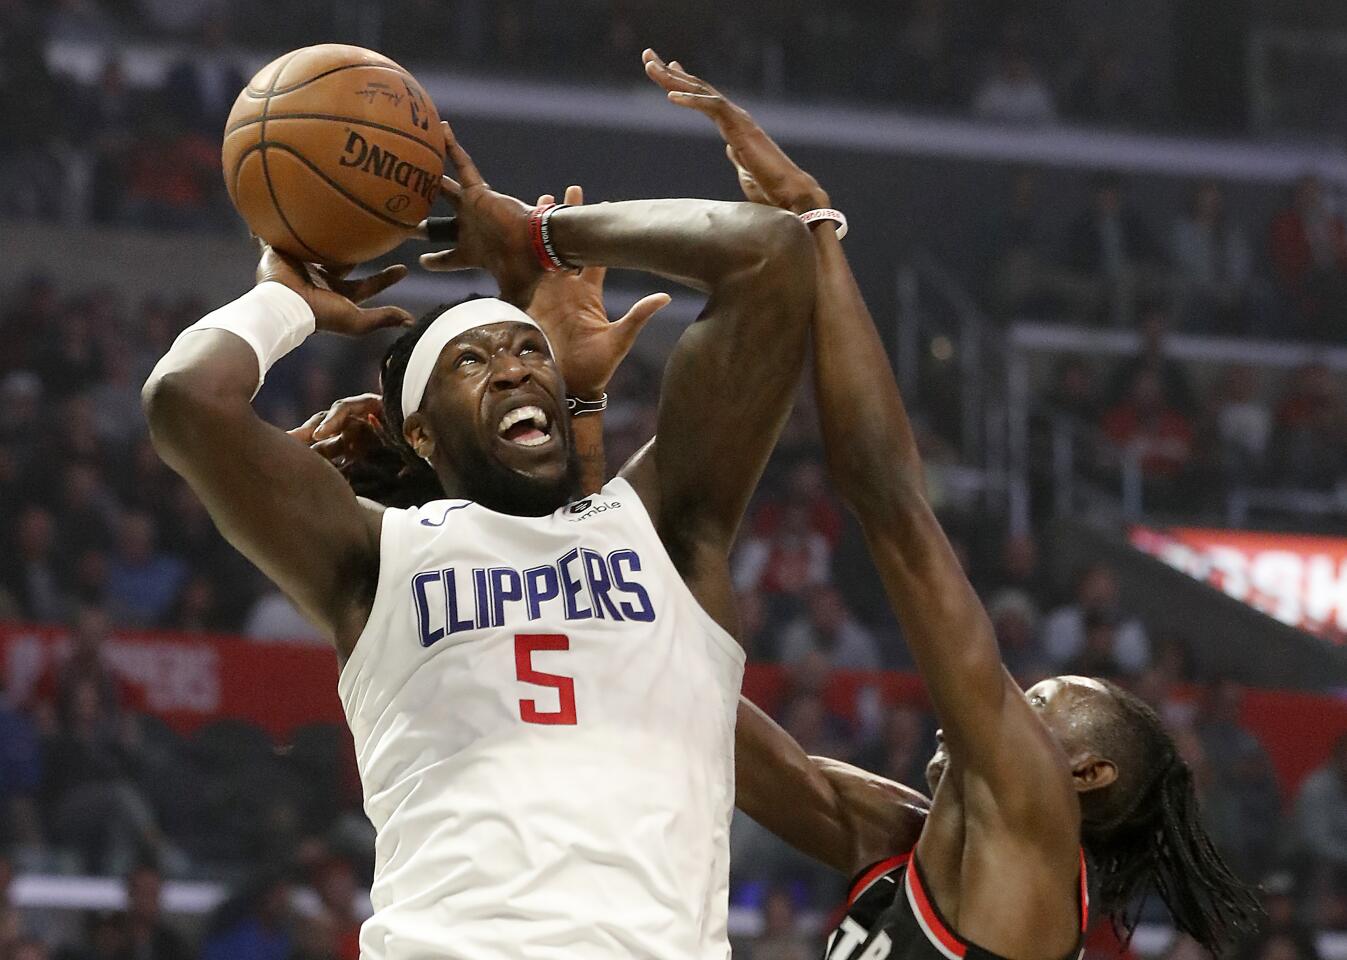 Clippers forward Montrezl Harrell goes up strong for an offensive rebound during the second quarter of a game Nov. 11 against the Raptors at Staples Center.